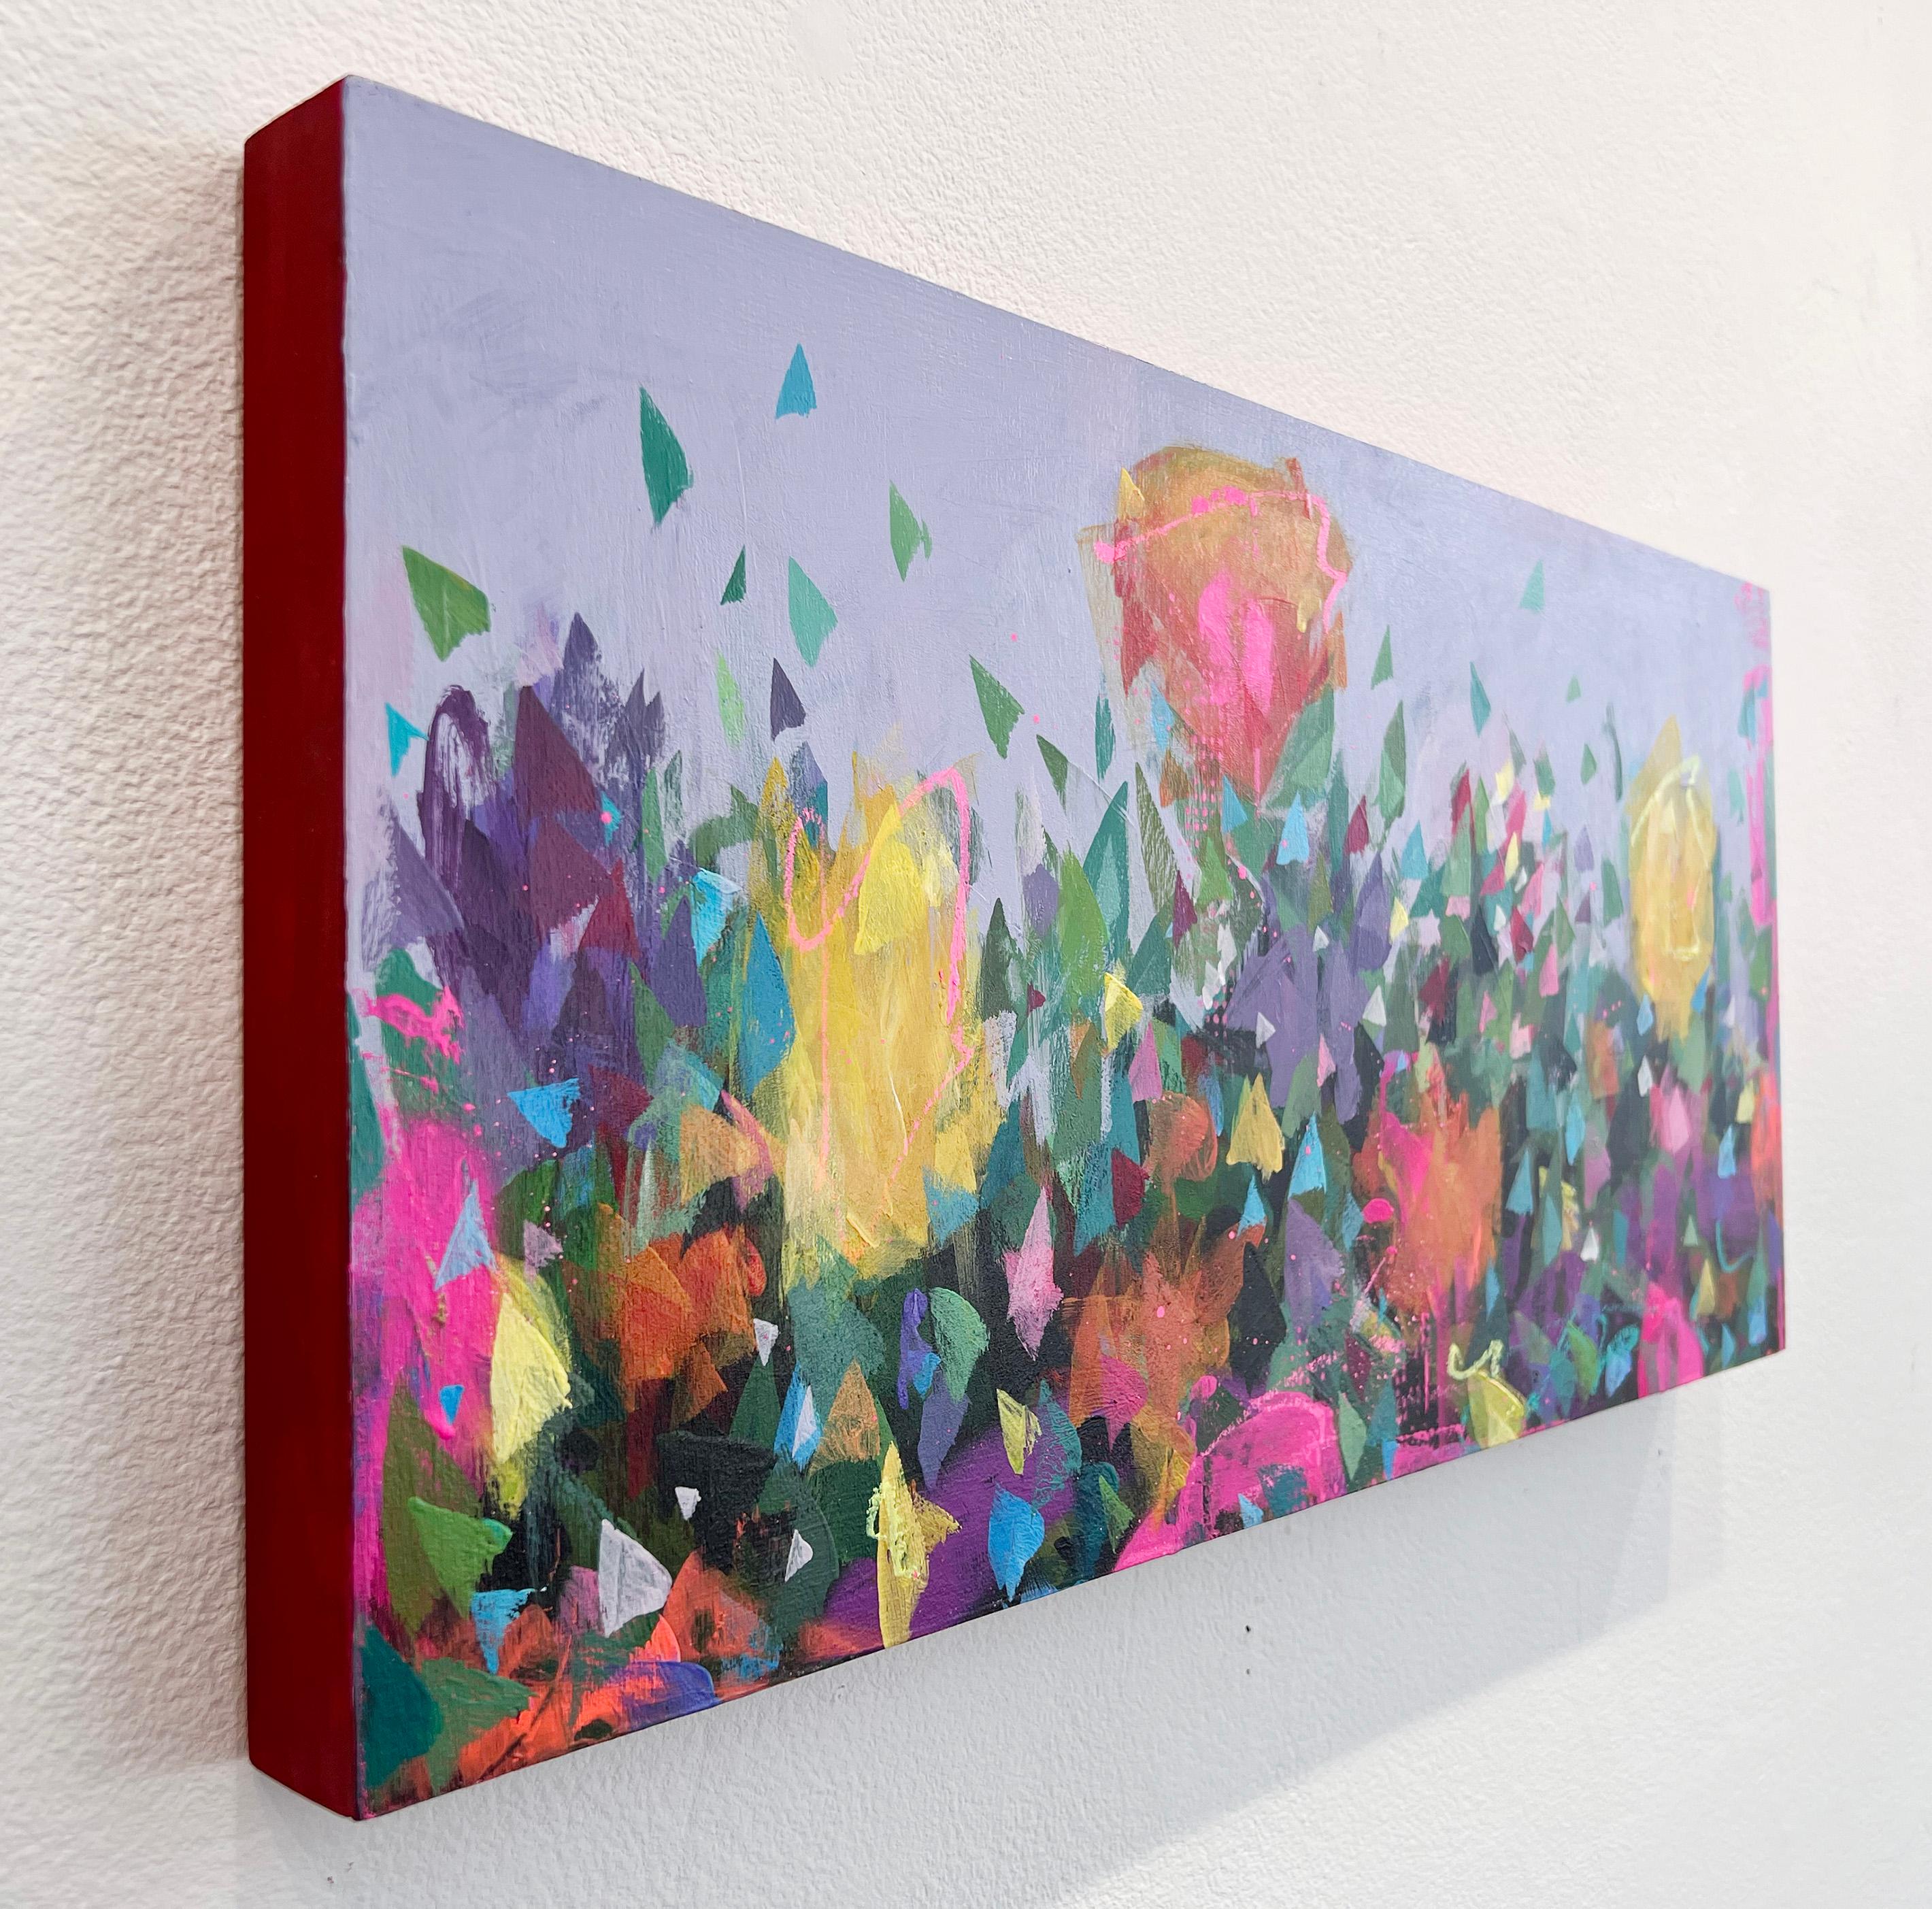 'Find Your Way Back' is an impressionist floral painting by urban impressionist painter Steve Javiel. The piece incorporates a blend of acrylic paints, spray paints, and solid markers on a wood panel, measuring 24 x 12 inches in size.

“The strong